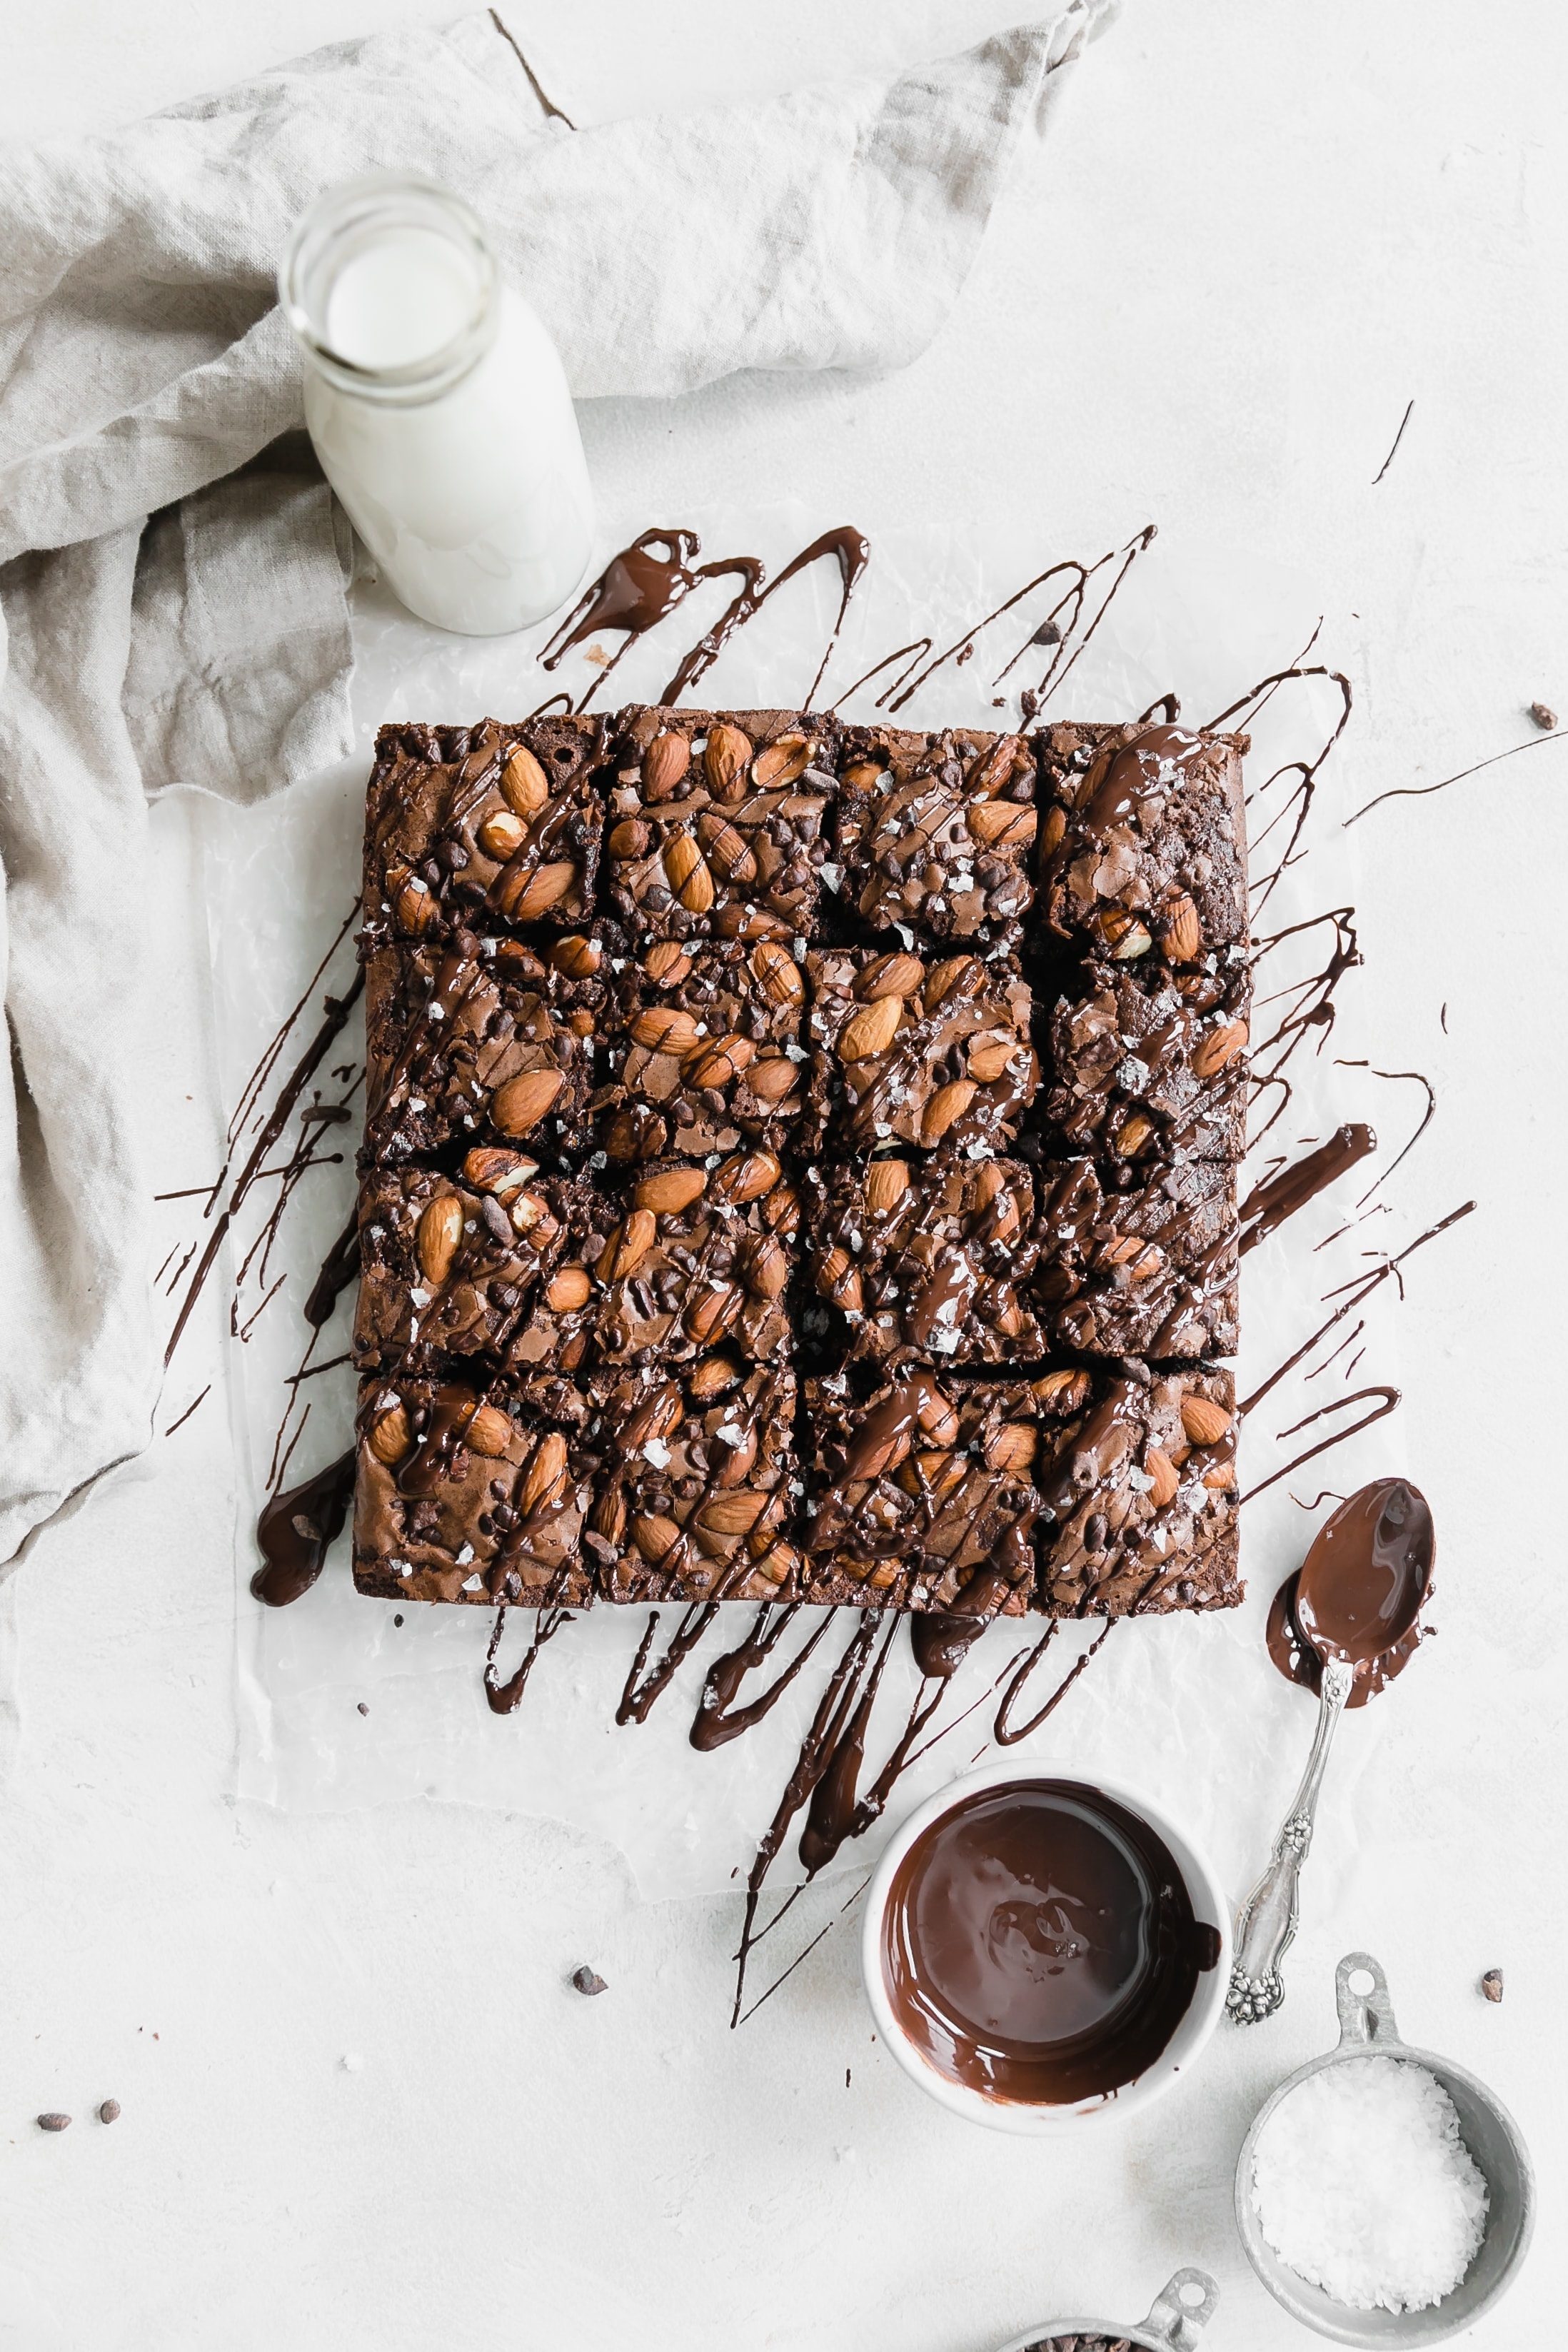 How to Make Boxed Brownies Better (AKA Lazy Girl Boxed Brownies)